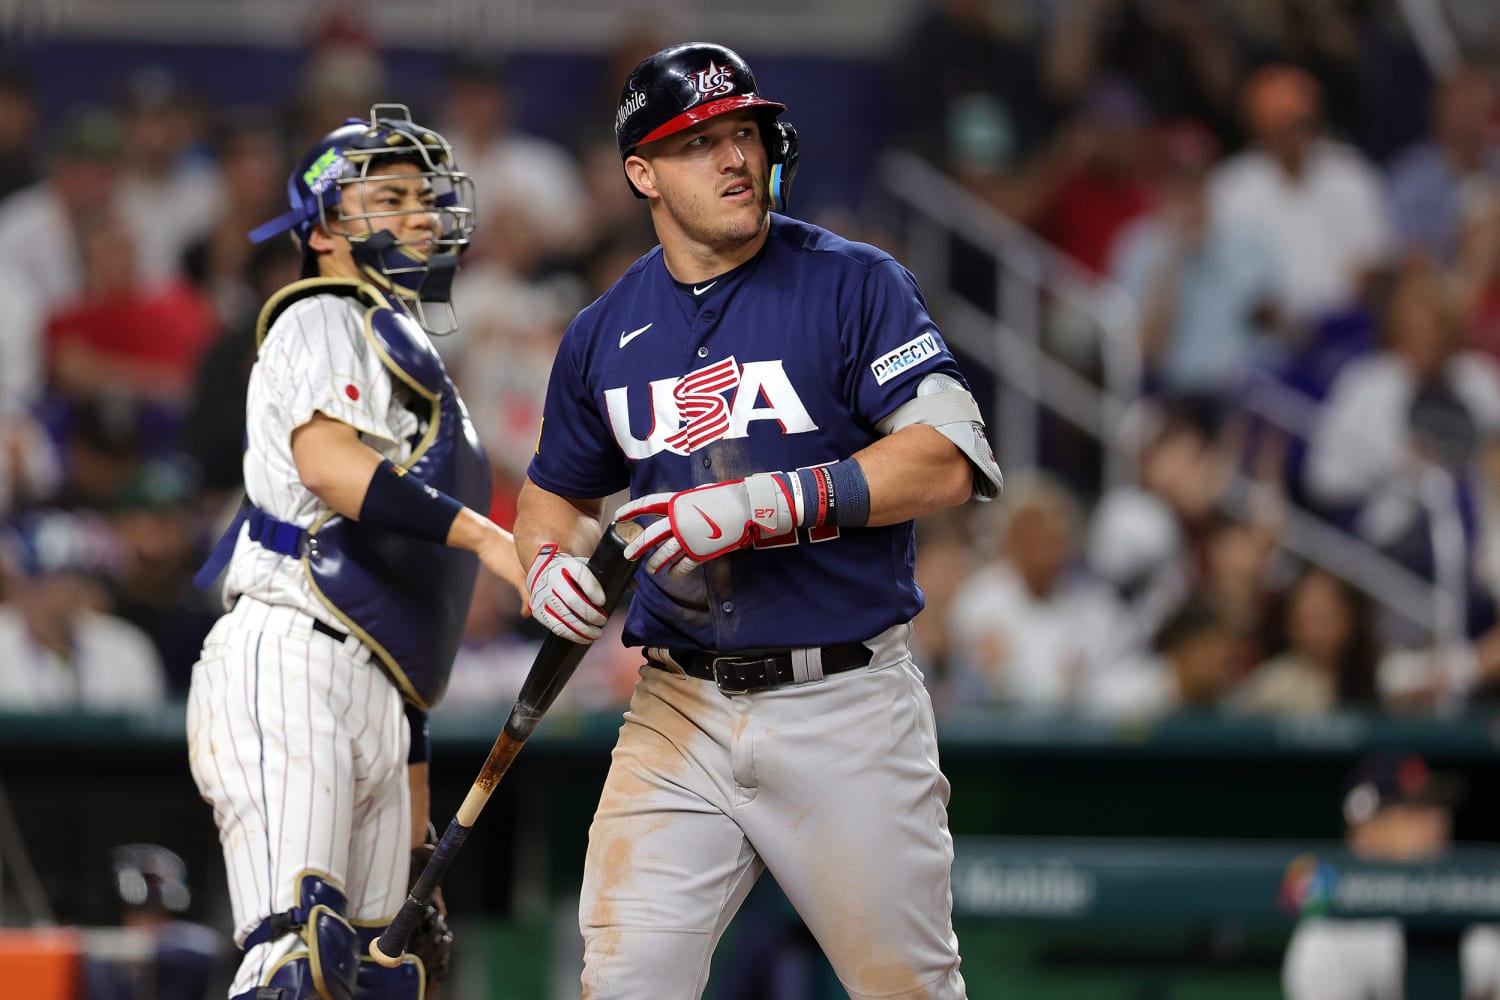 Japan stuns U.S. in dramatic final out to win the World Baseball